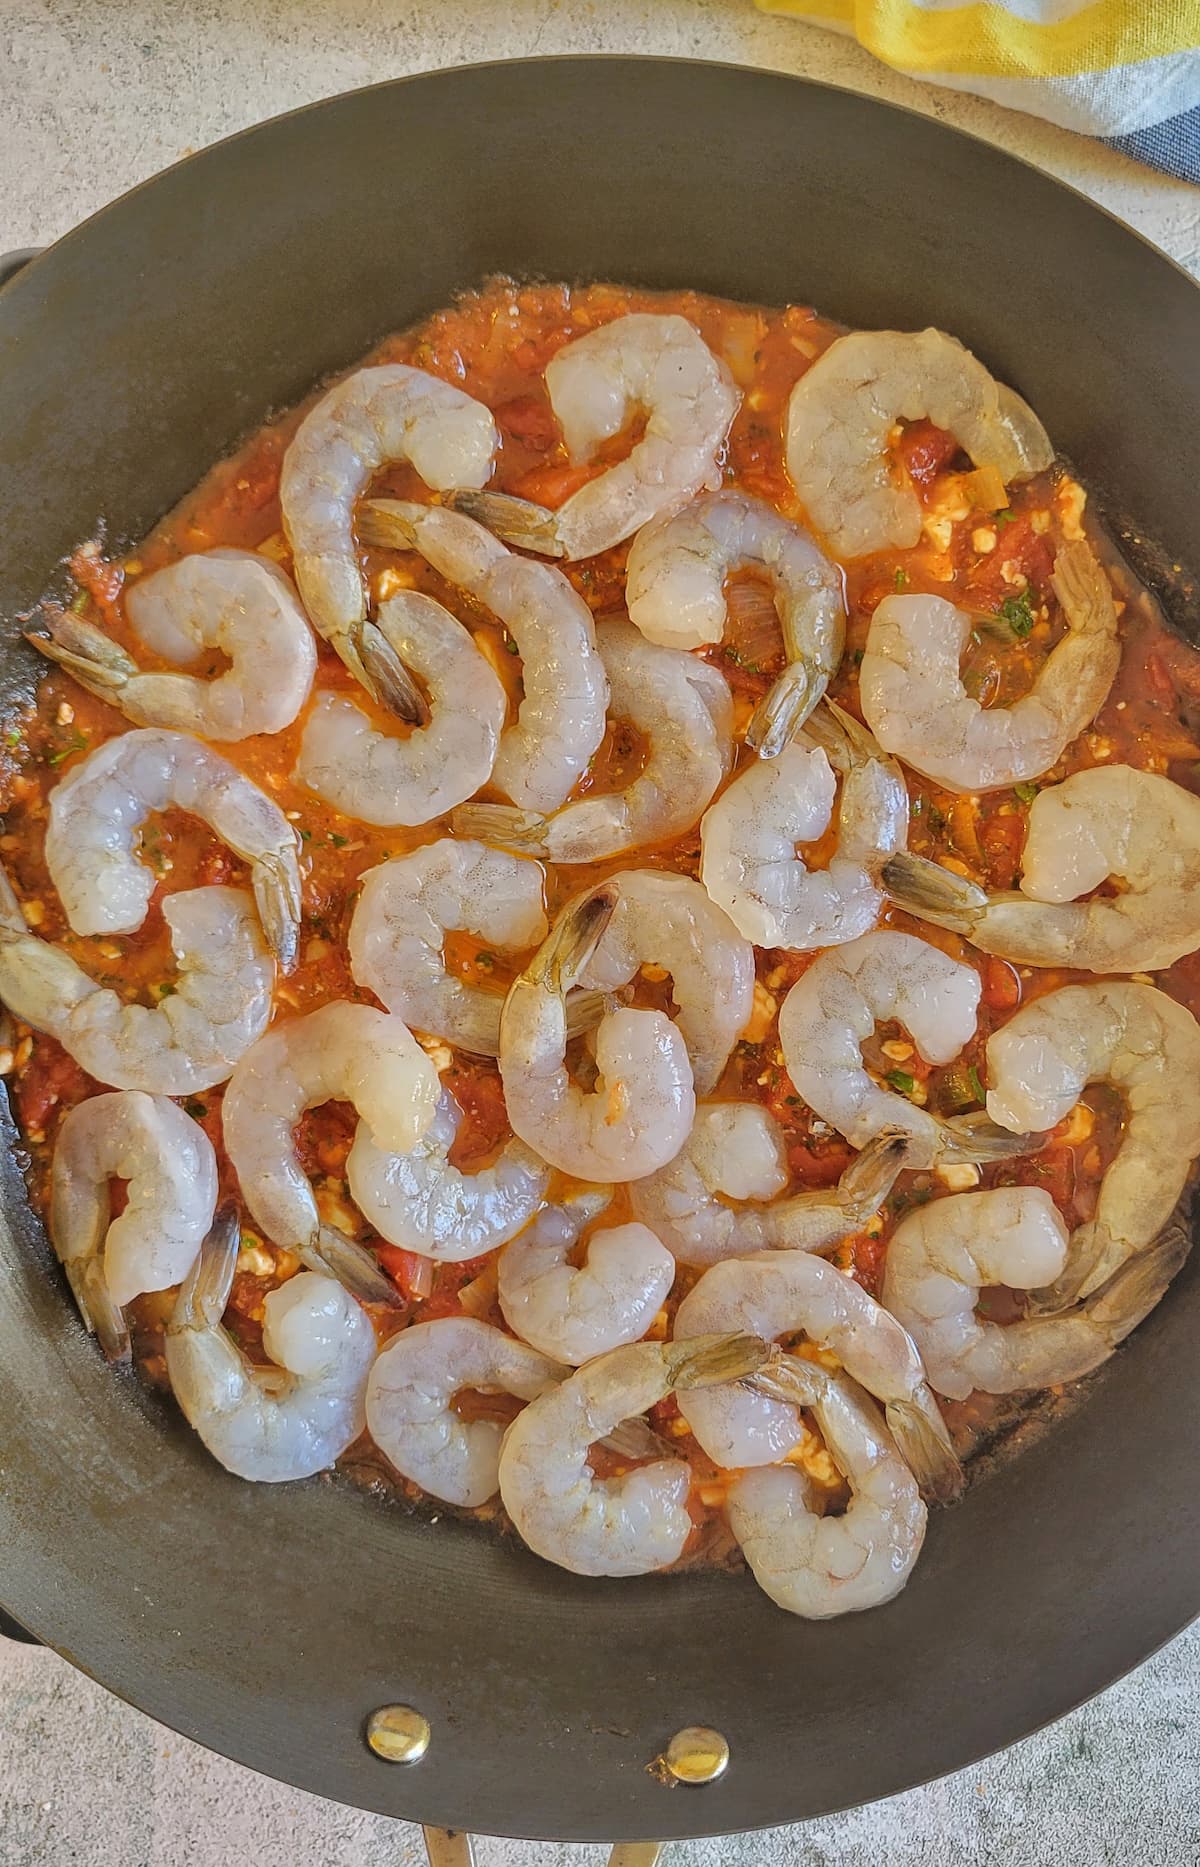 raw shrimp on a bed of diced tomatoes in a wok